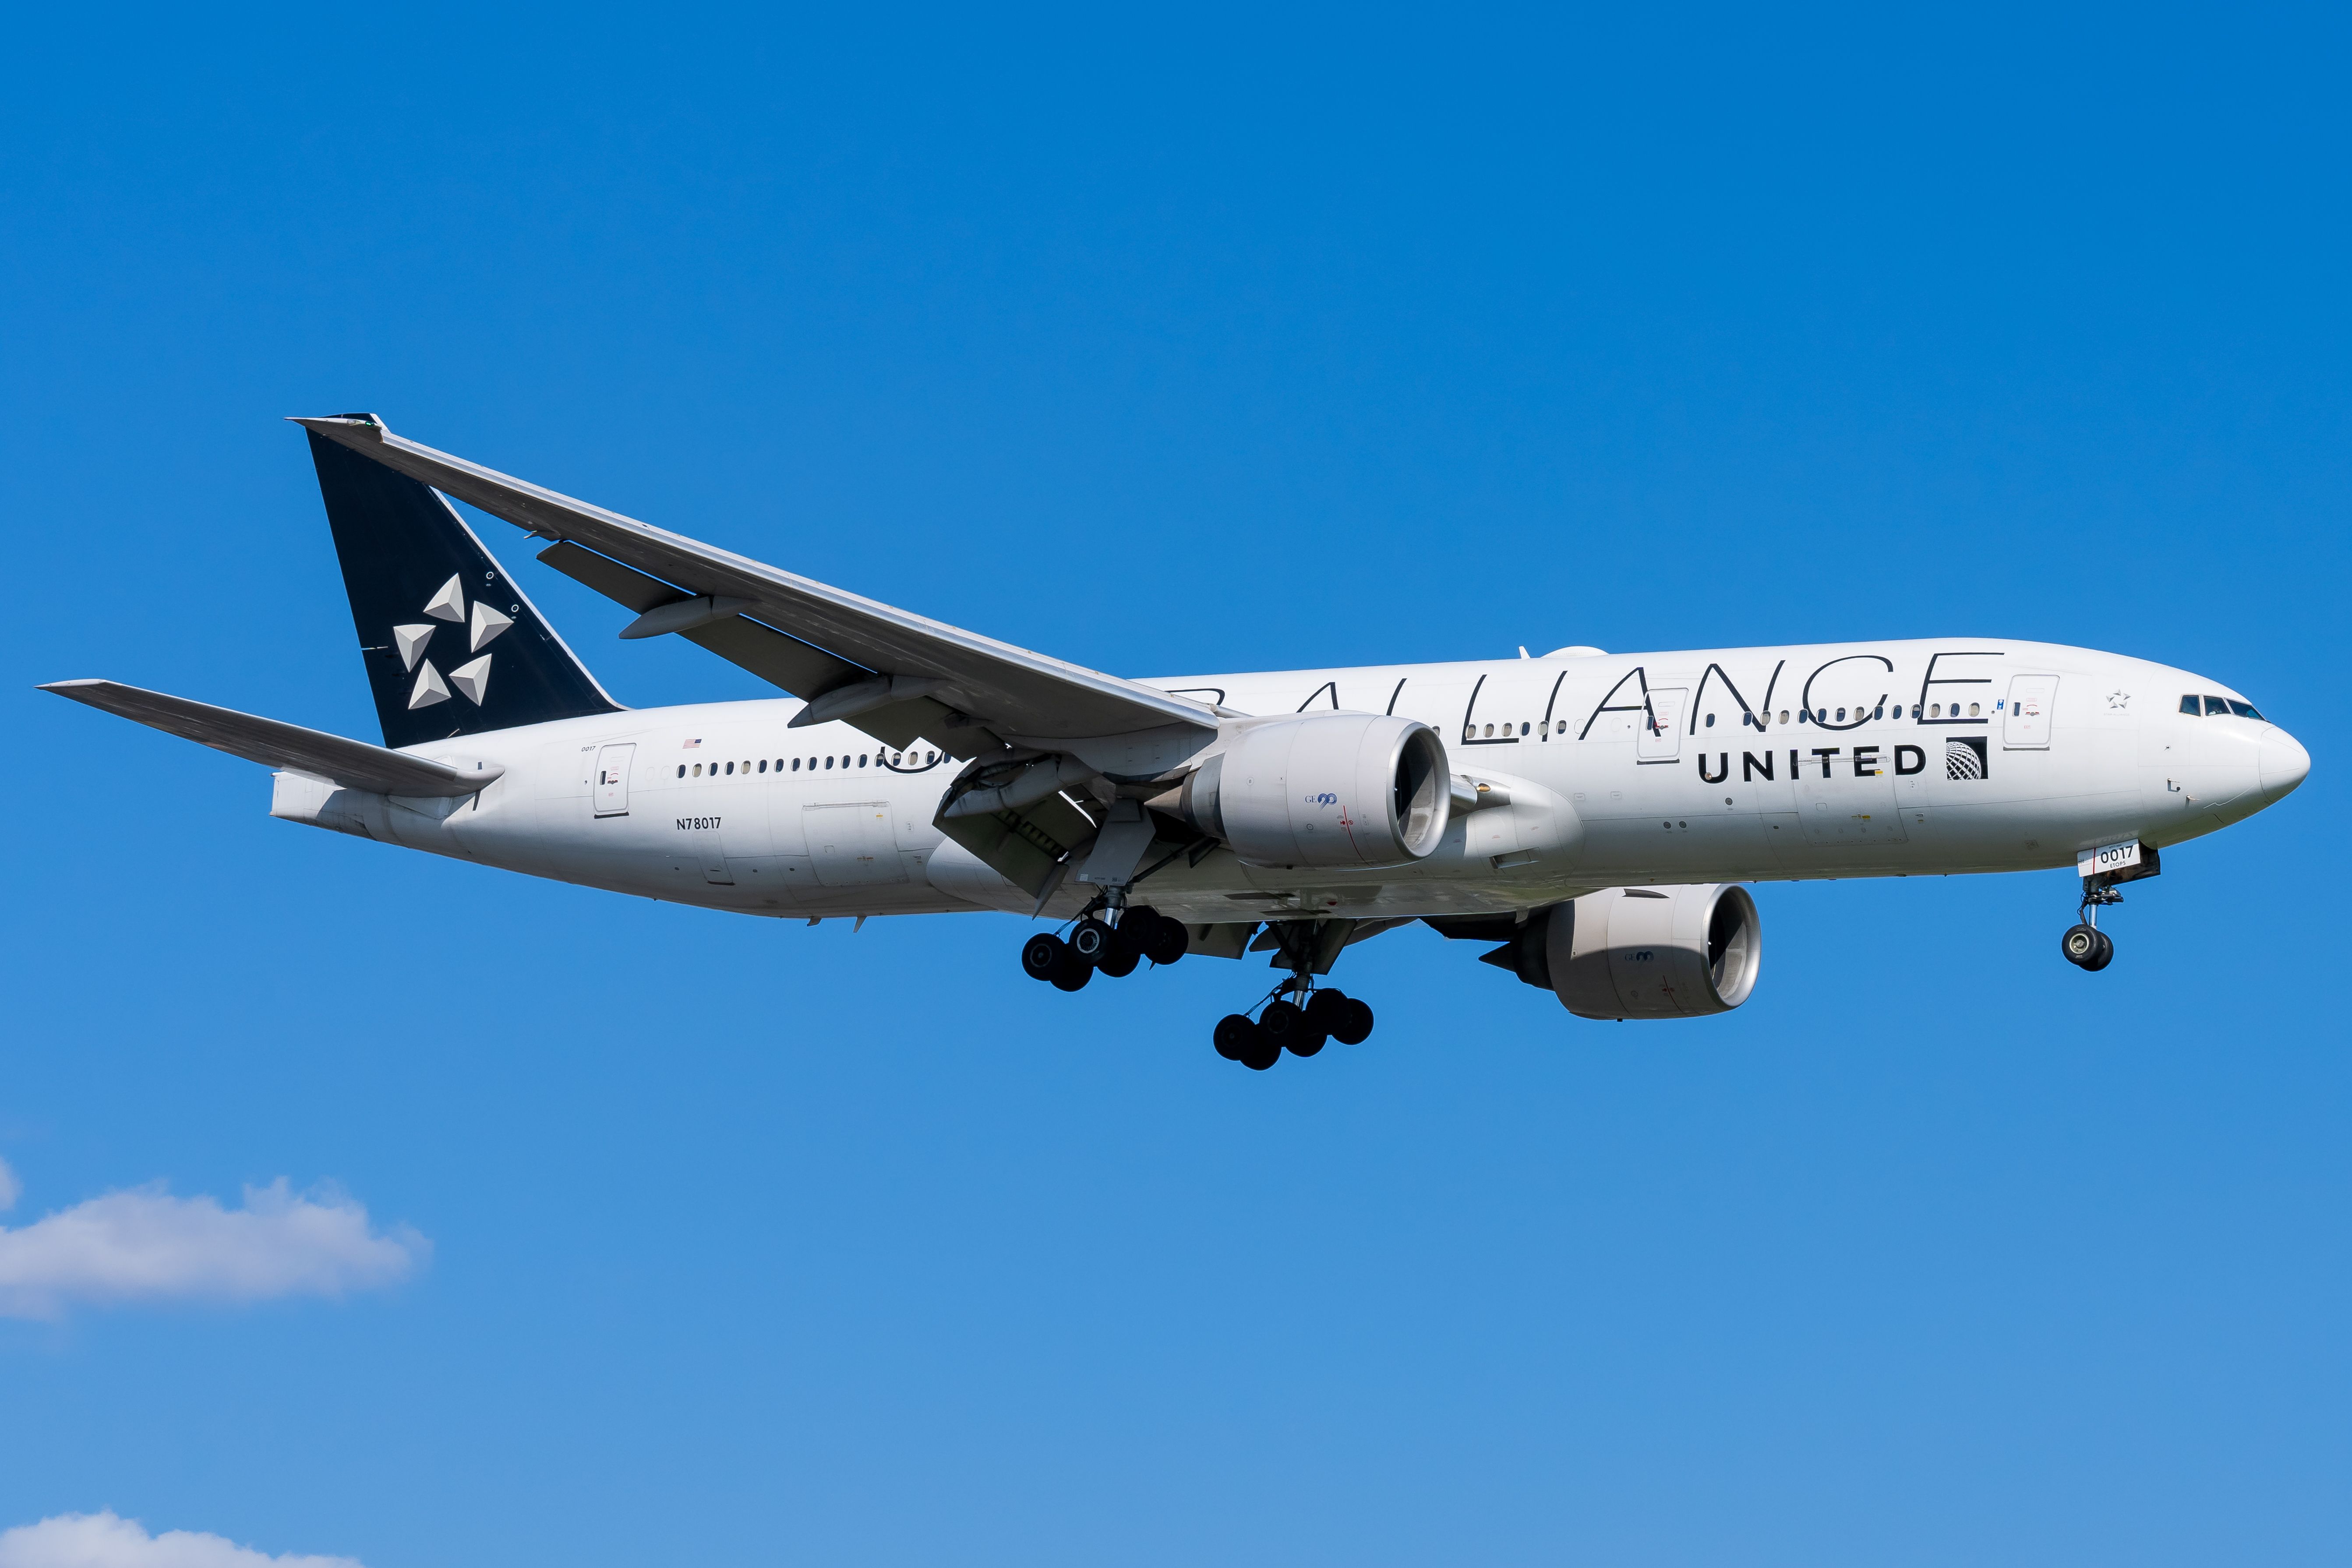 A United Airlines Boeing 777 in Star Alliance livery Flying in the sky.